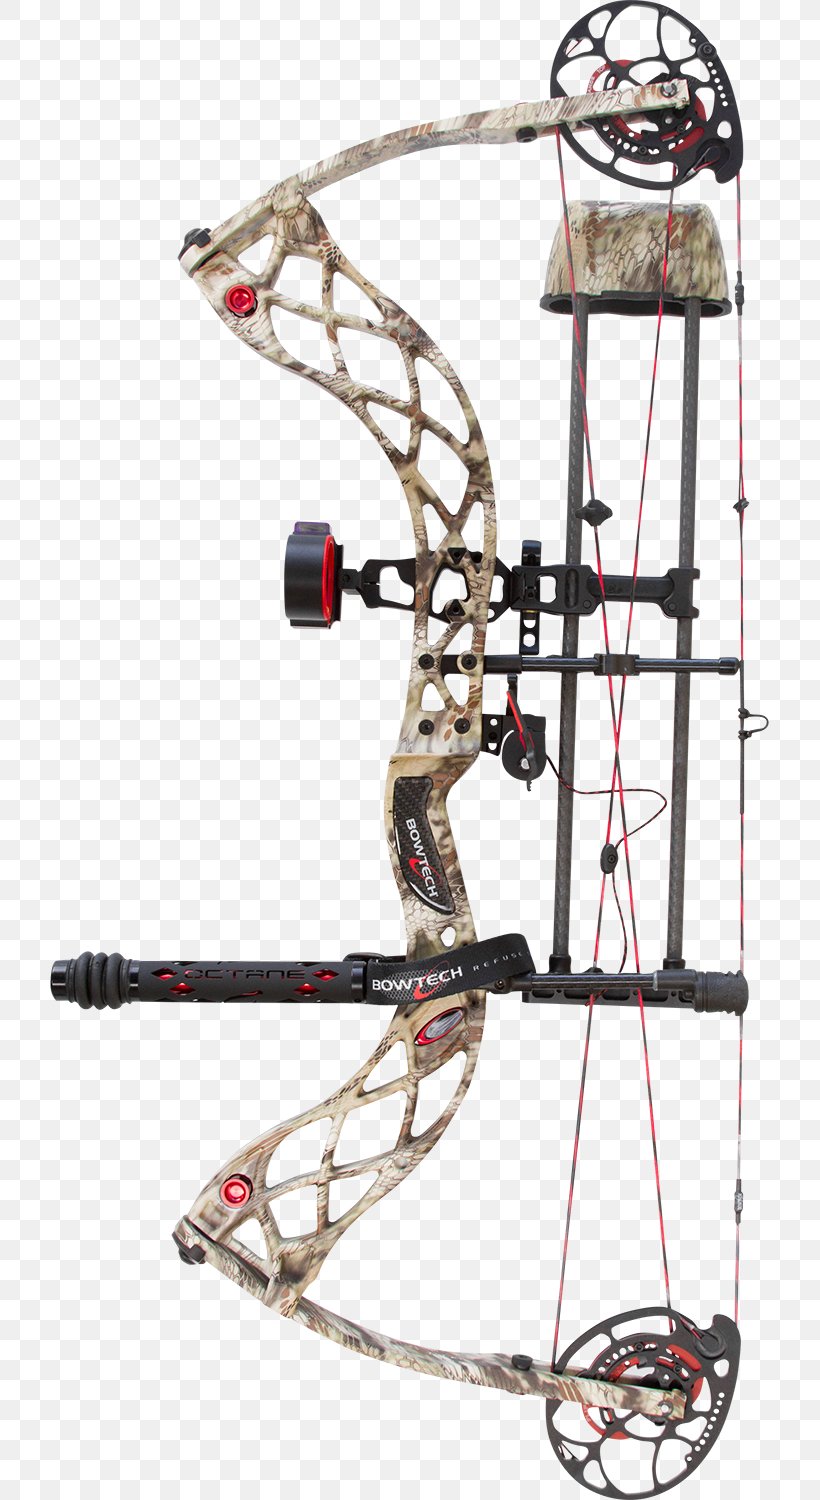 BowTech Archery Carbon Compound Bows Technology Bow And Arrow, PNG, 719x1500px, Bowtech Archery, Archery, Binary Cam, Bow, Bow And Arrow Download Free